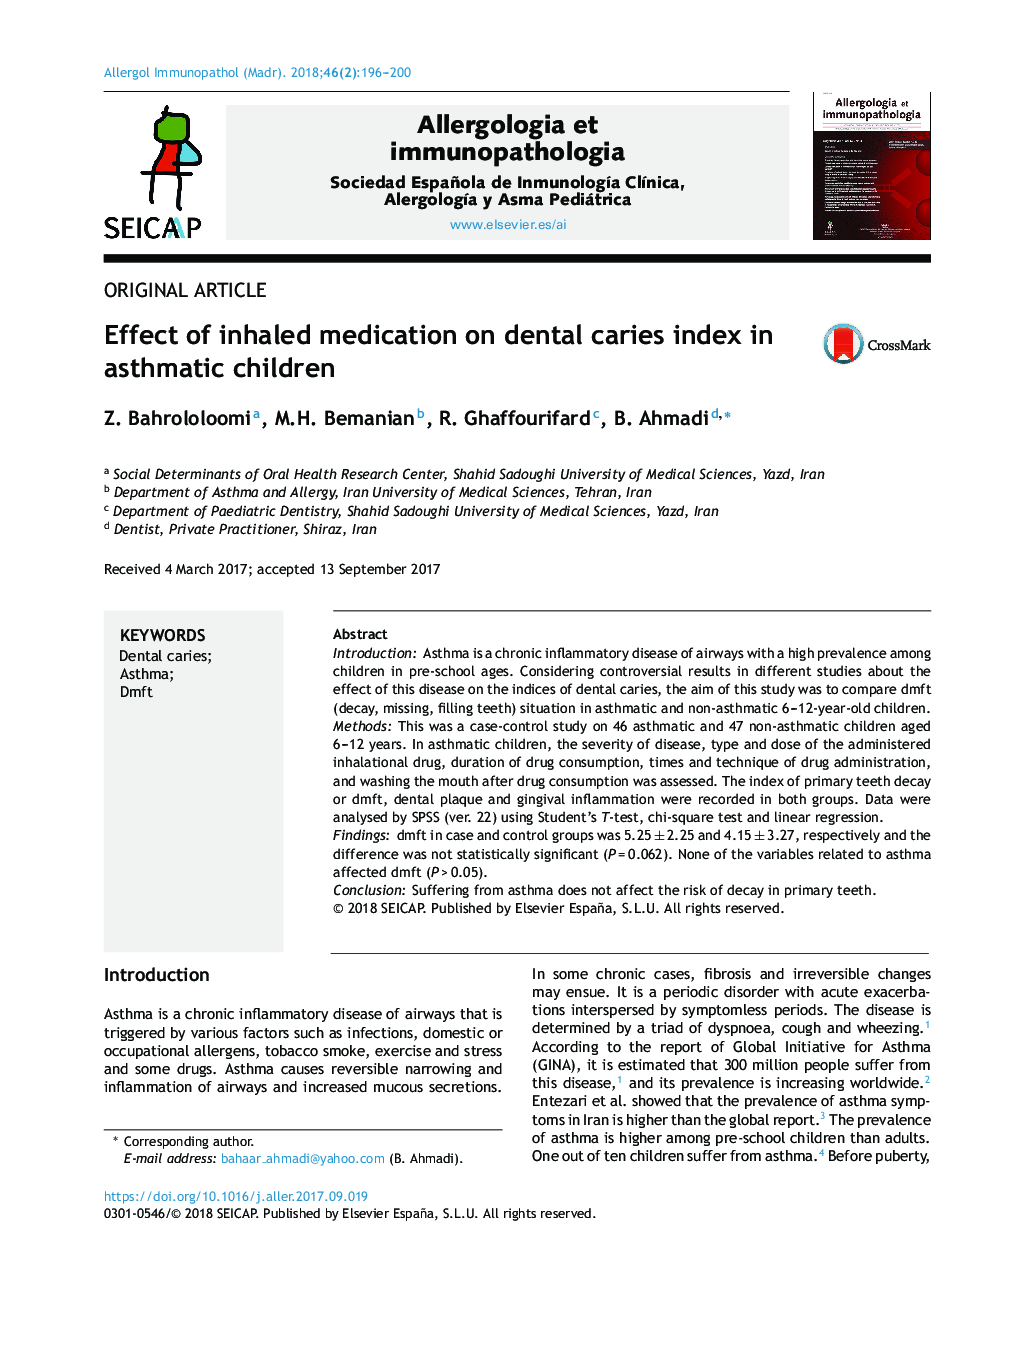 Effect of inhaled medication on dental caries index in asthmatic children